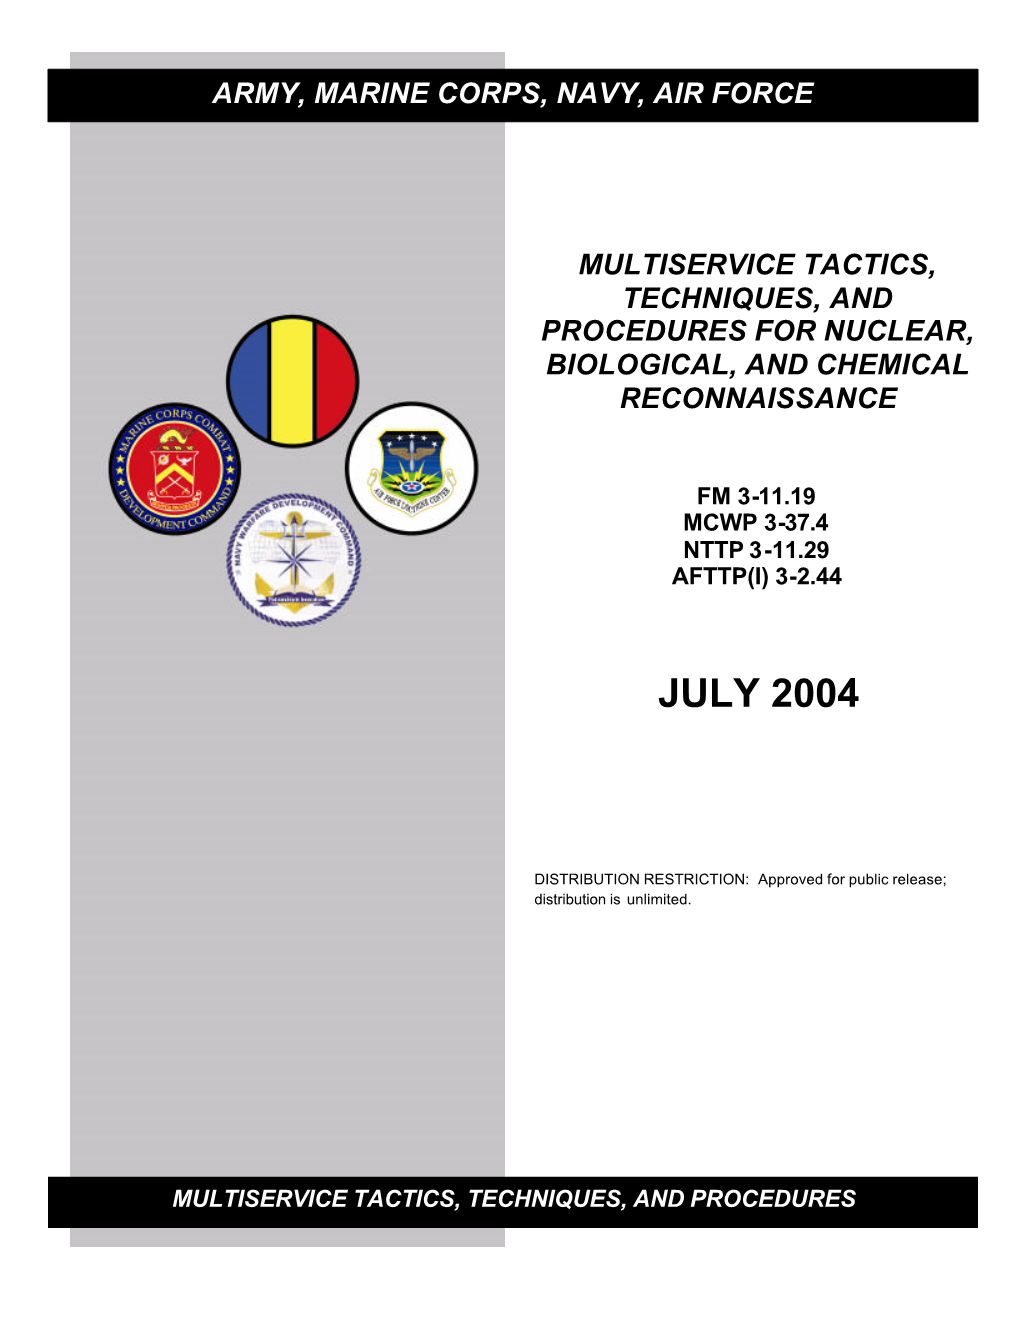 Multiservice Tactics, Techniques, and Procedures for Nuclear, Biological, and Chemical Reconnaissance